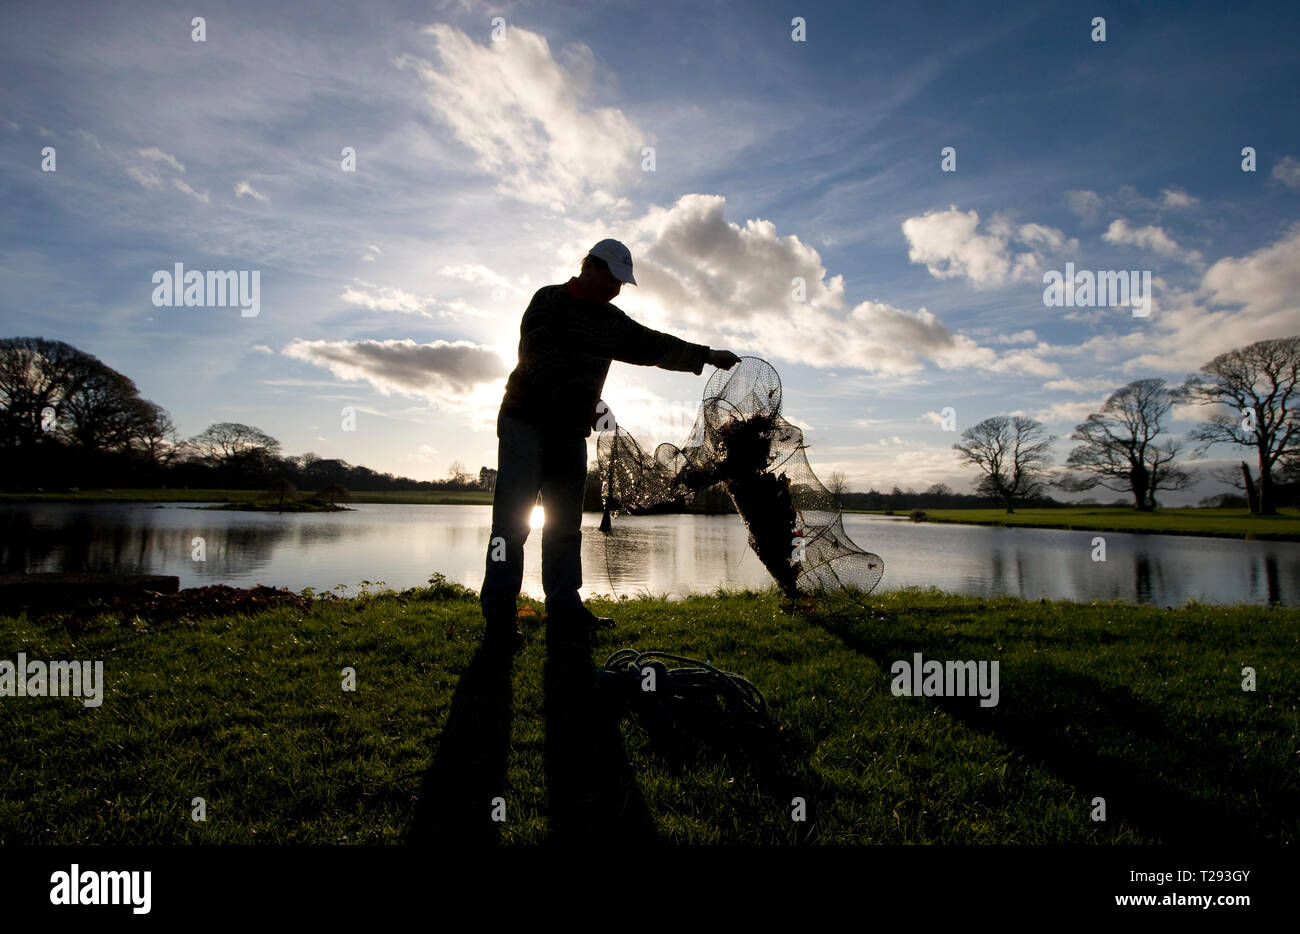 Fisherman David McCreadie clears a traditional fyke net of leaves and debris at the edge of a small inland lake on Anglesey, north Wales, during the fishing season. Once caught, the eels are transferred to tanks before being killed, gutted and prepared for market at Mr McCreadie's Derimon Smokery on the island. With a reported 95 per cent drop in eel numbers across England and Wales, there is concern that this age-old tradition may be under threat. Stock Photo